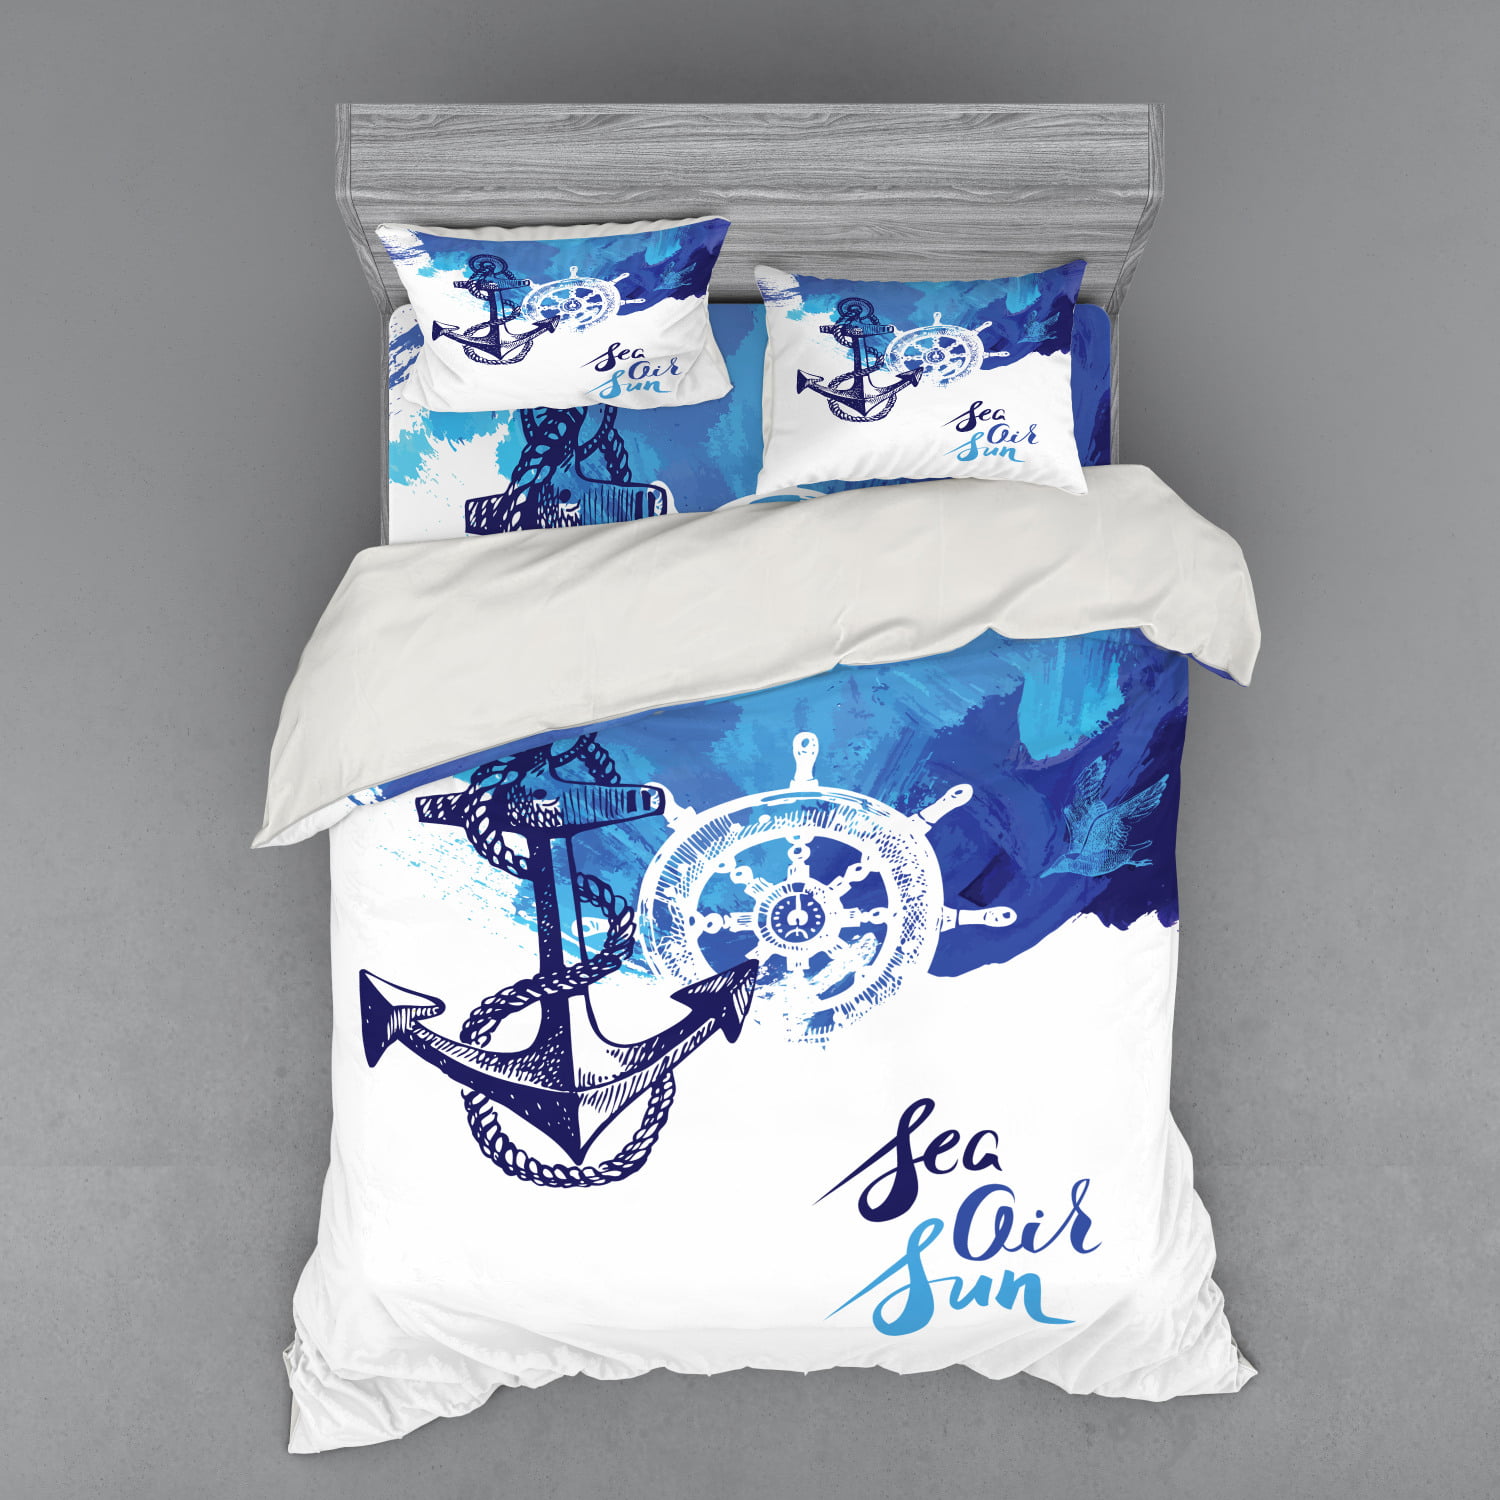 Vivid Ocean Back with Paint Effects with Wind Rose and Rudder Cruise Image Shades of Blue Ambesonne Nautical Duvet Cover Set Queen Size Decorative 3 Piece Bedding Set with 2 Pillow Shams